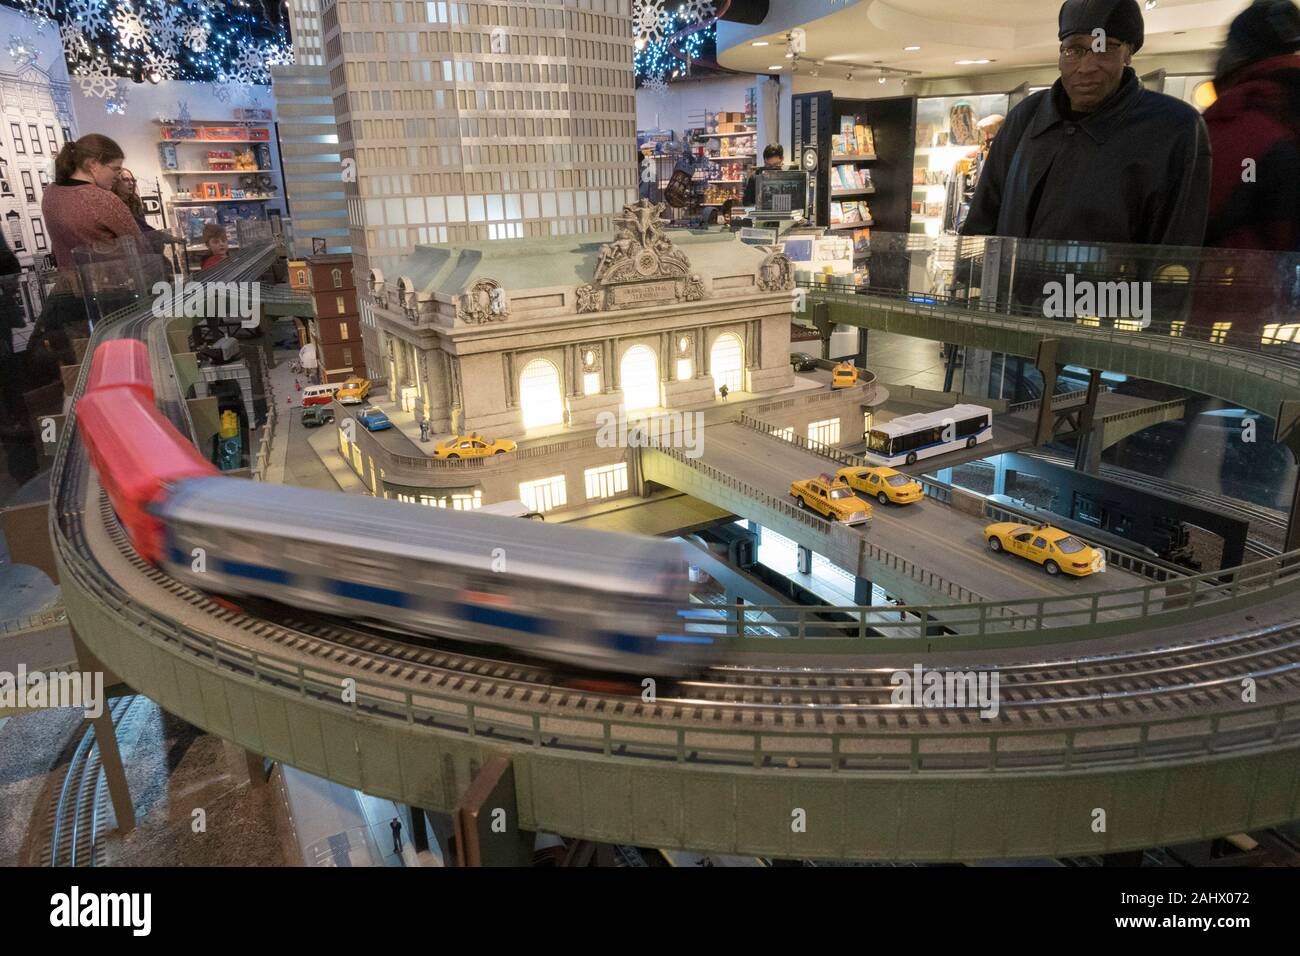 Annual Holiday Toy Train Display is a Popular Attraction, Transit Museum, Grand Central Terminal, NYC Stock Photo